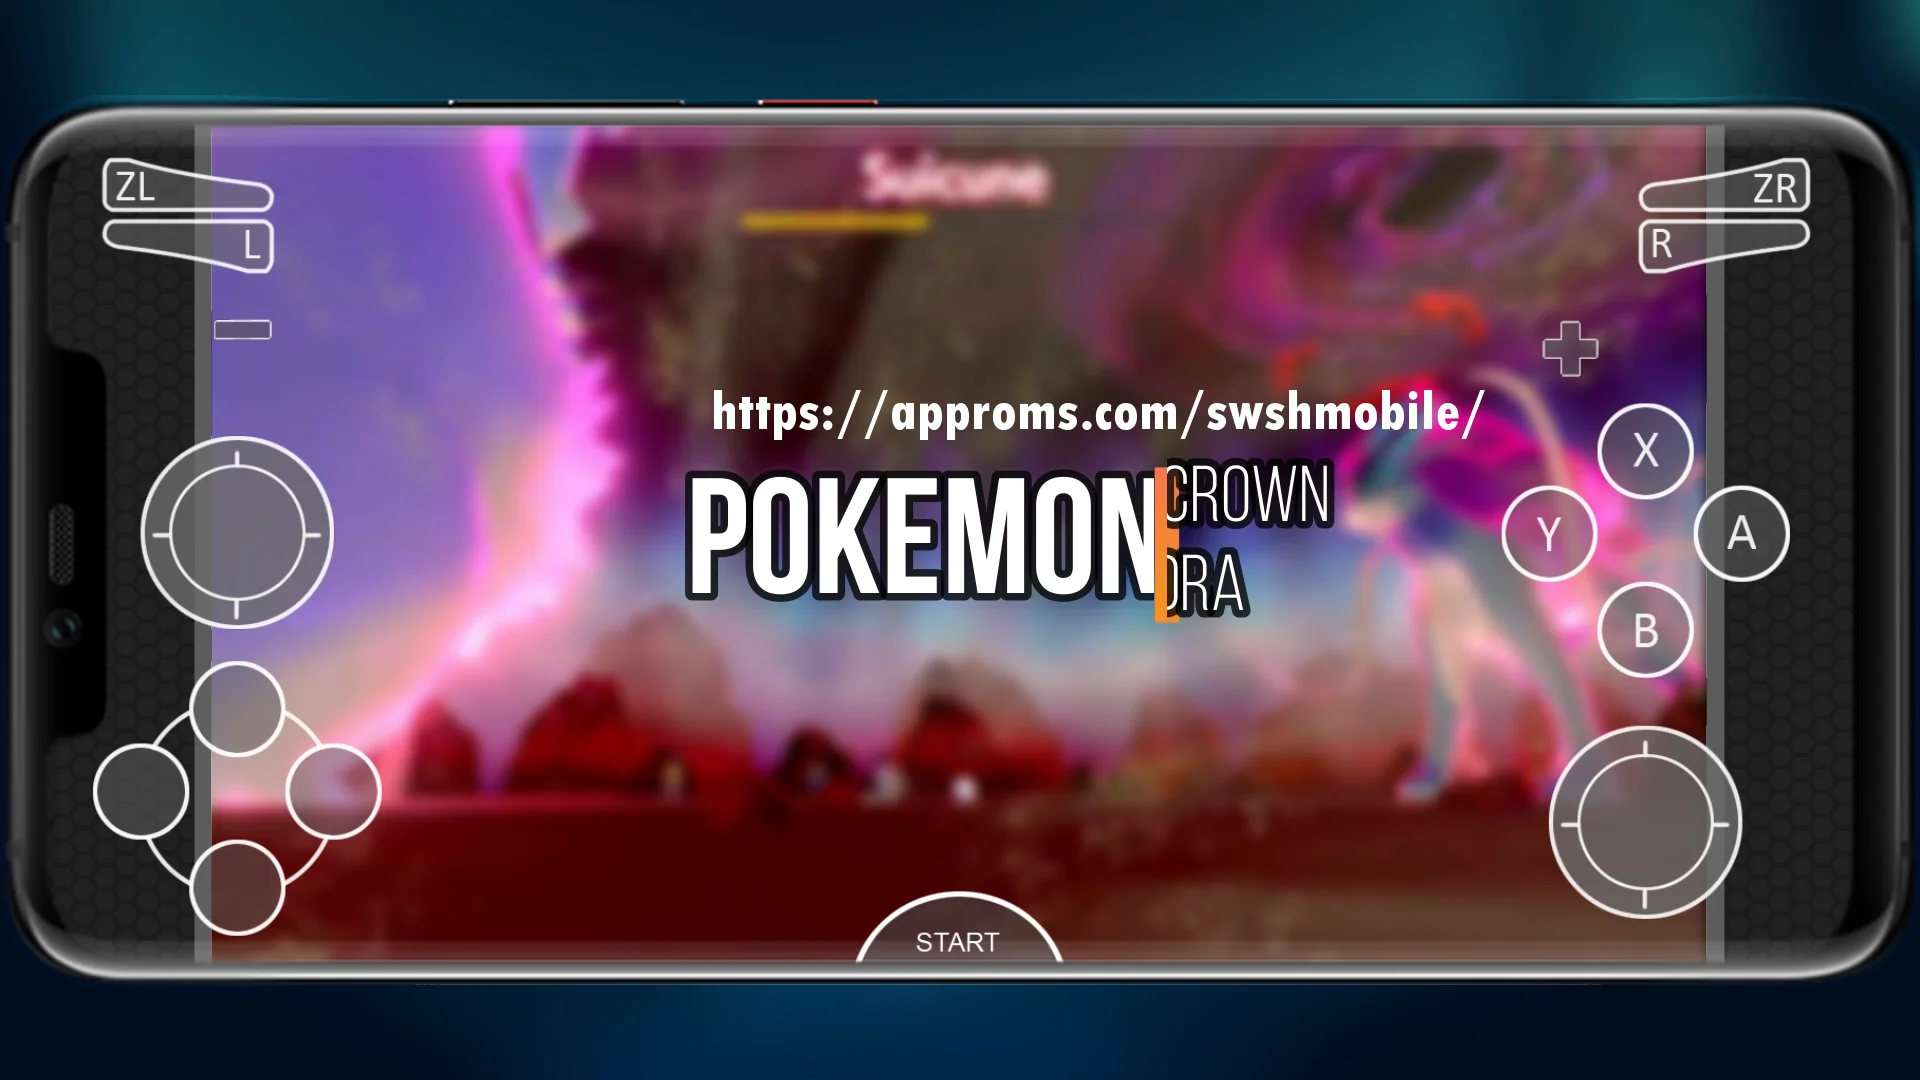 How To download Pokémon Sword APK Version On Android [The Crown Tundra  Update] on Vimeo